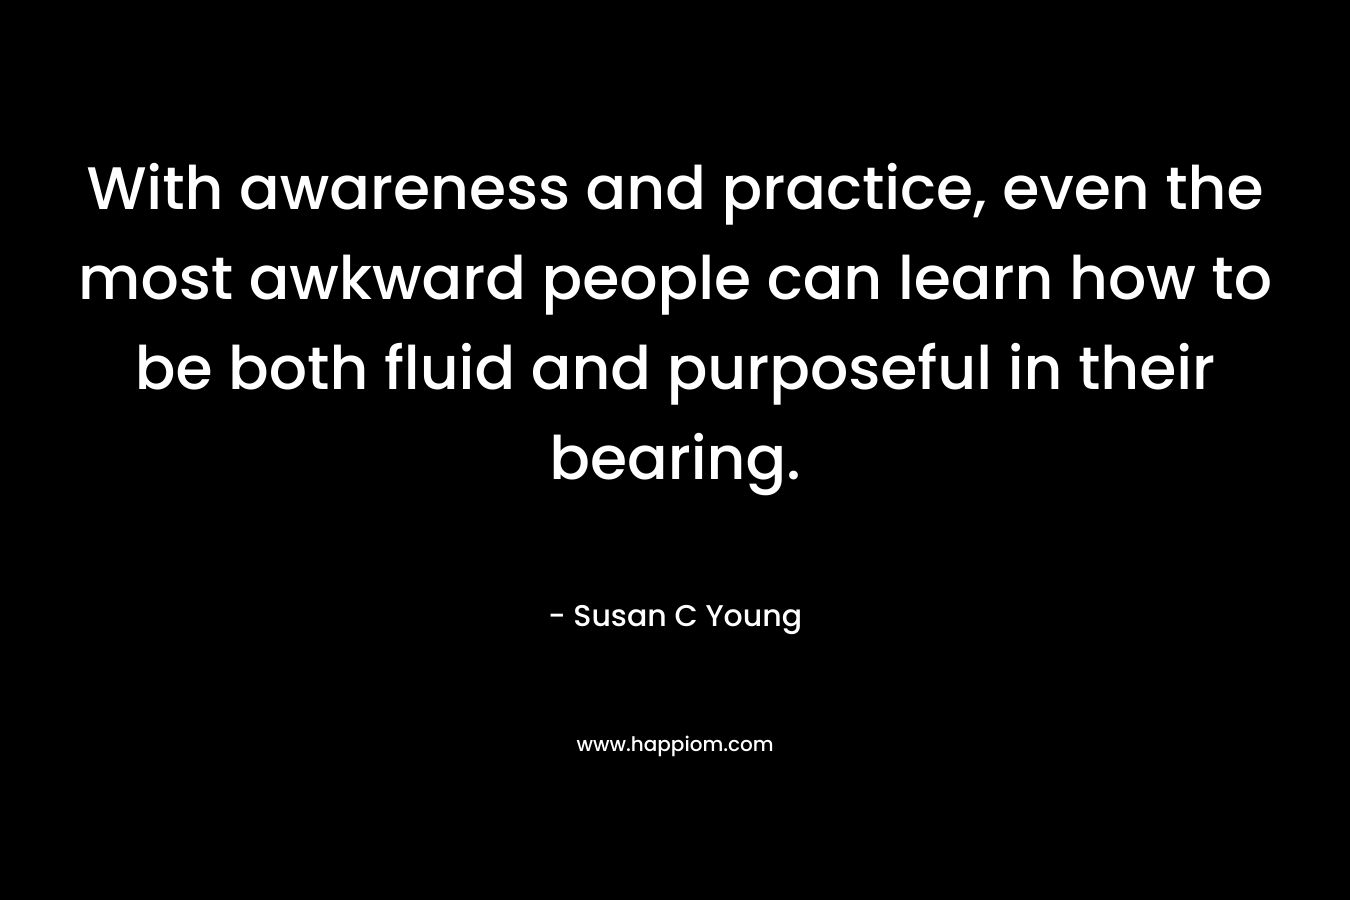 With awareness and practice, even the most awkward people can learn how to be both fluid and purposeful in their bearing. – Susan C Young